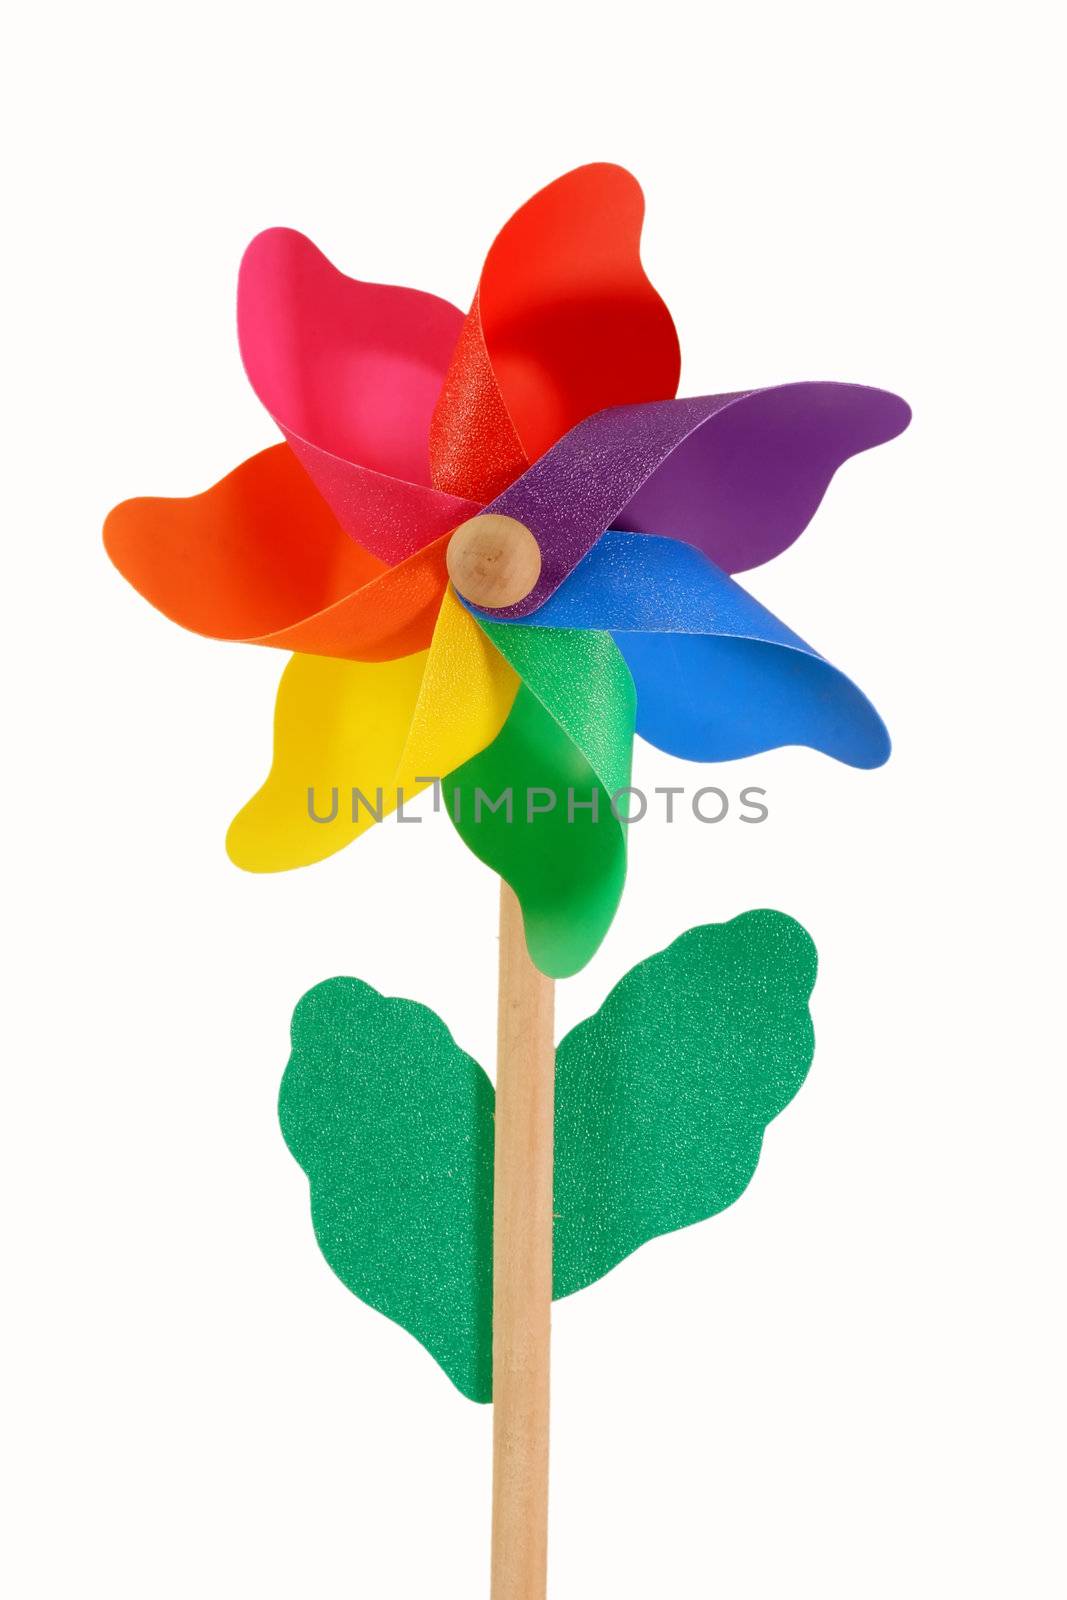 Colored pinwheel isolated on white

